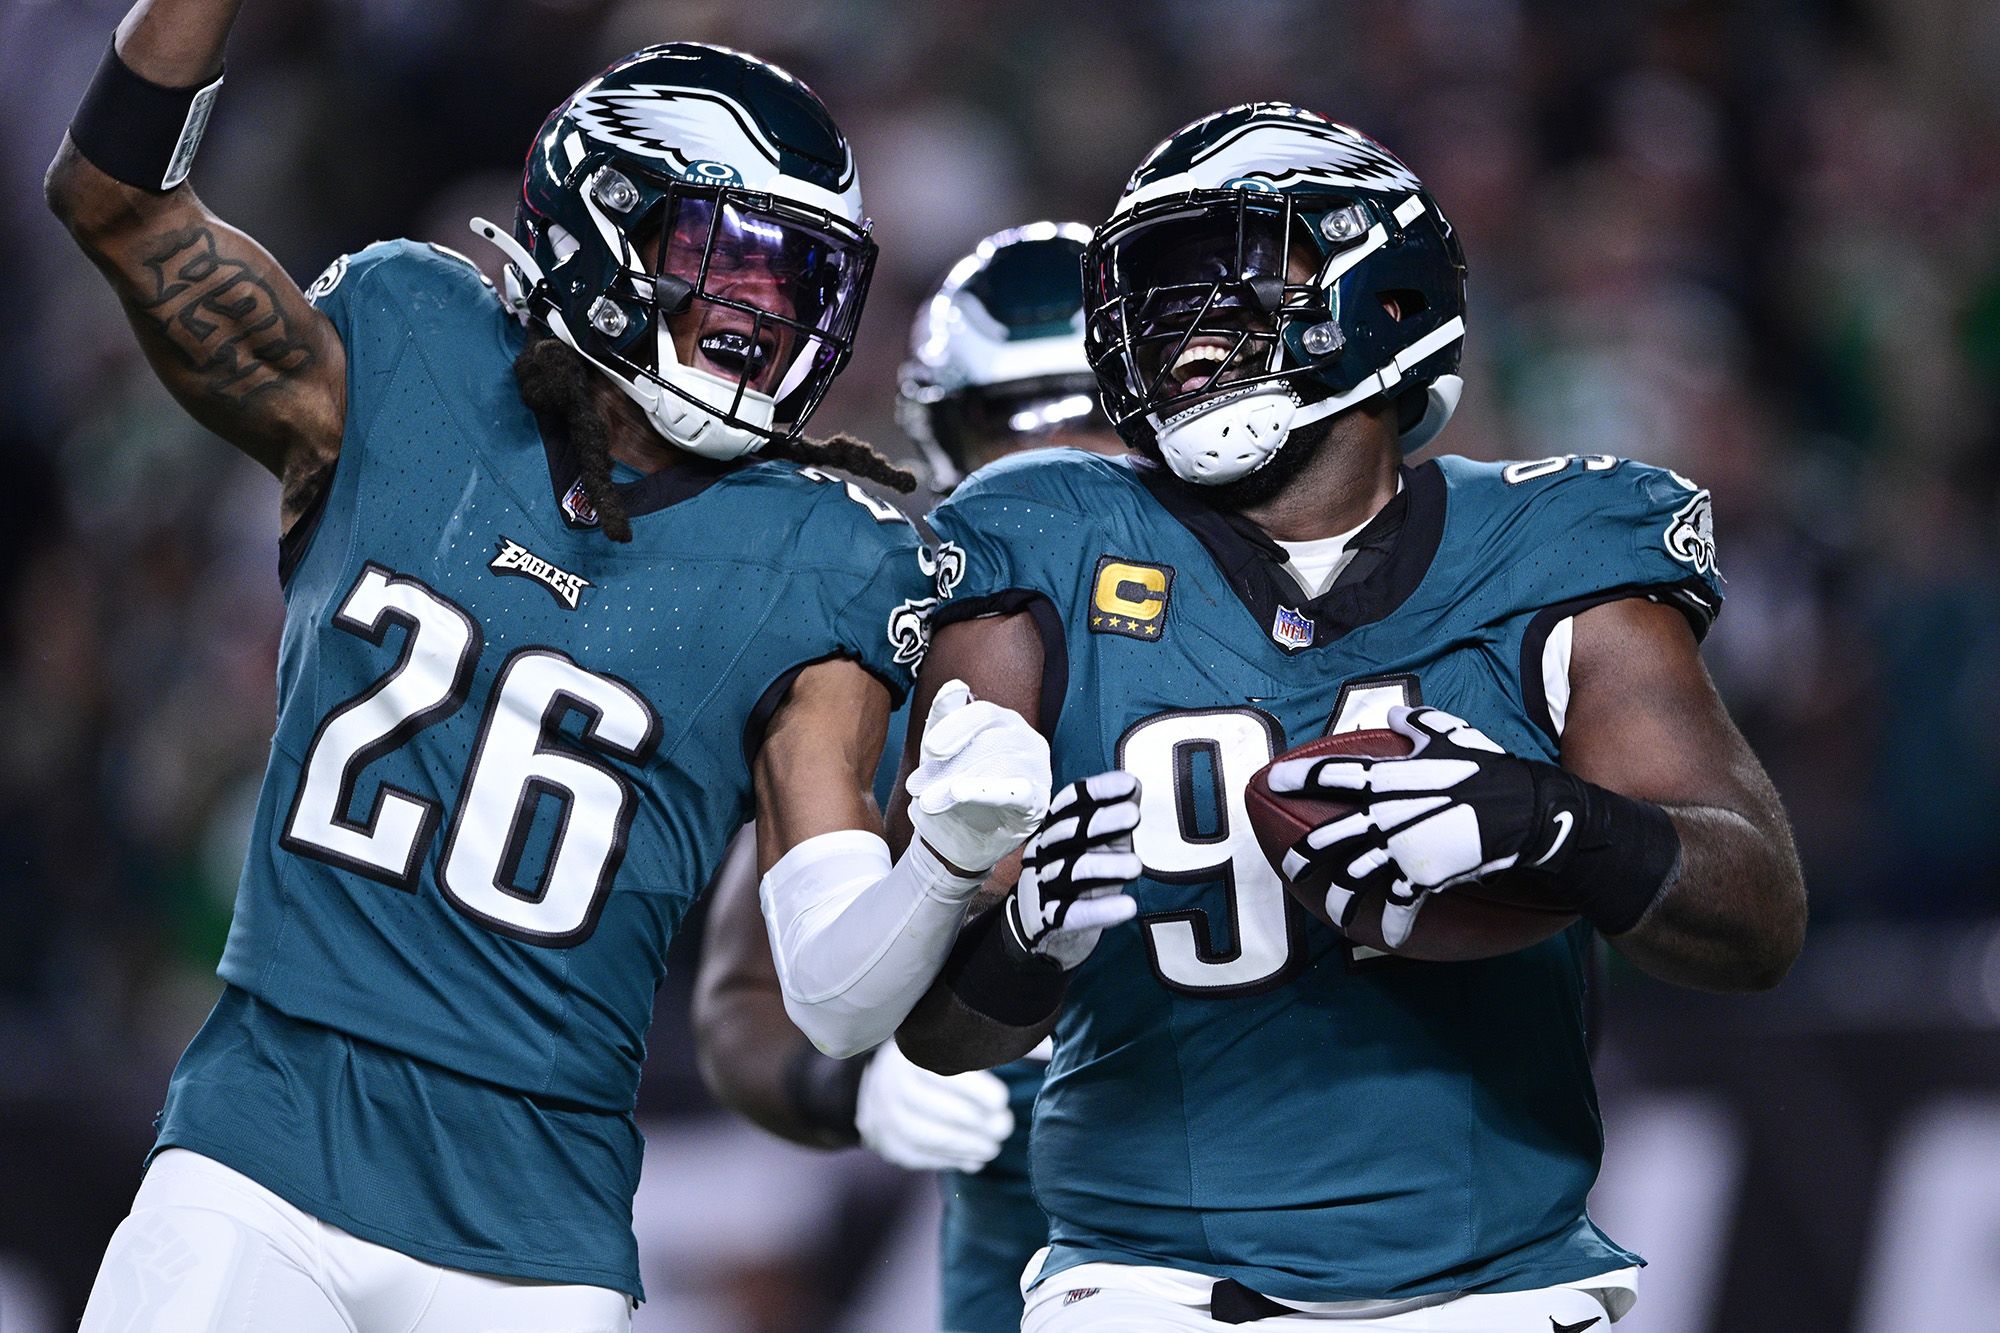 Eagles beat Vikings 34-28 as D'Andre Swift rushes for career-high